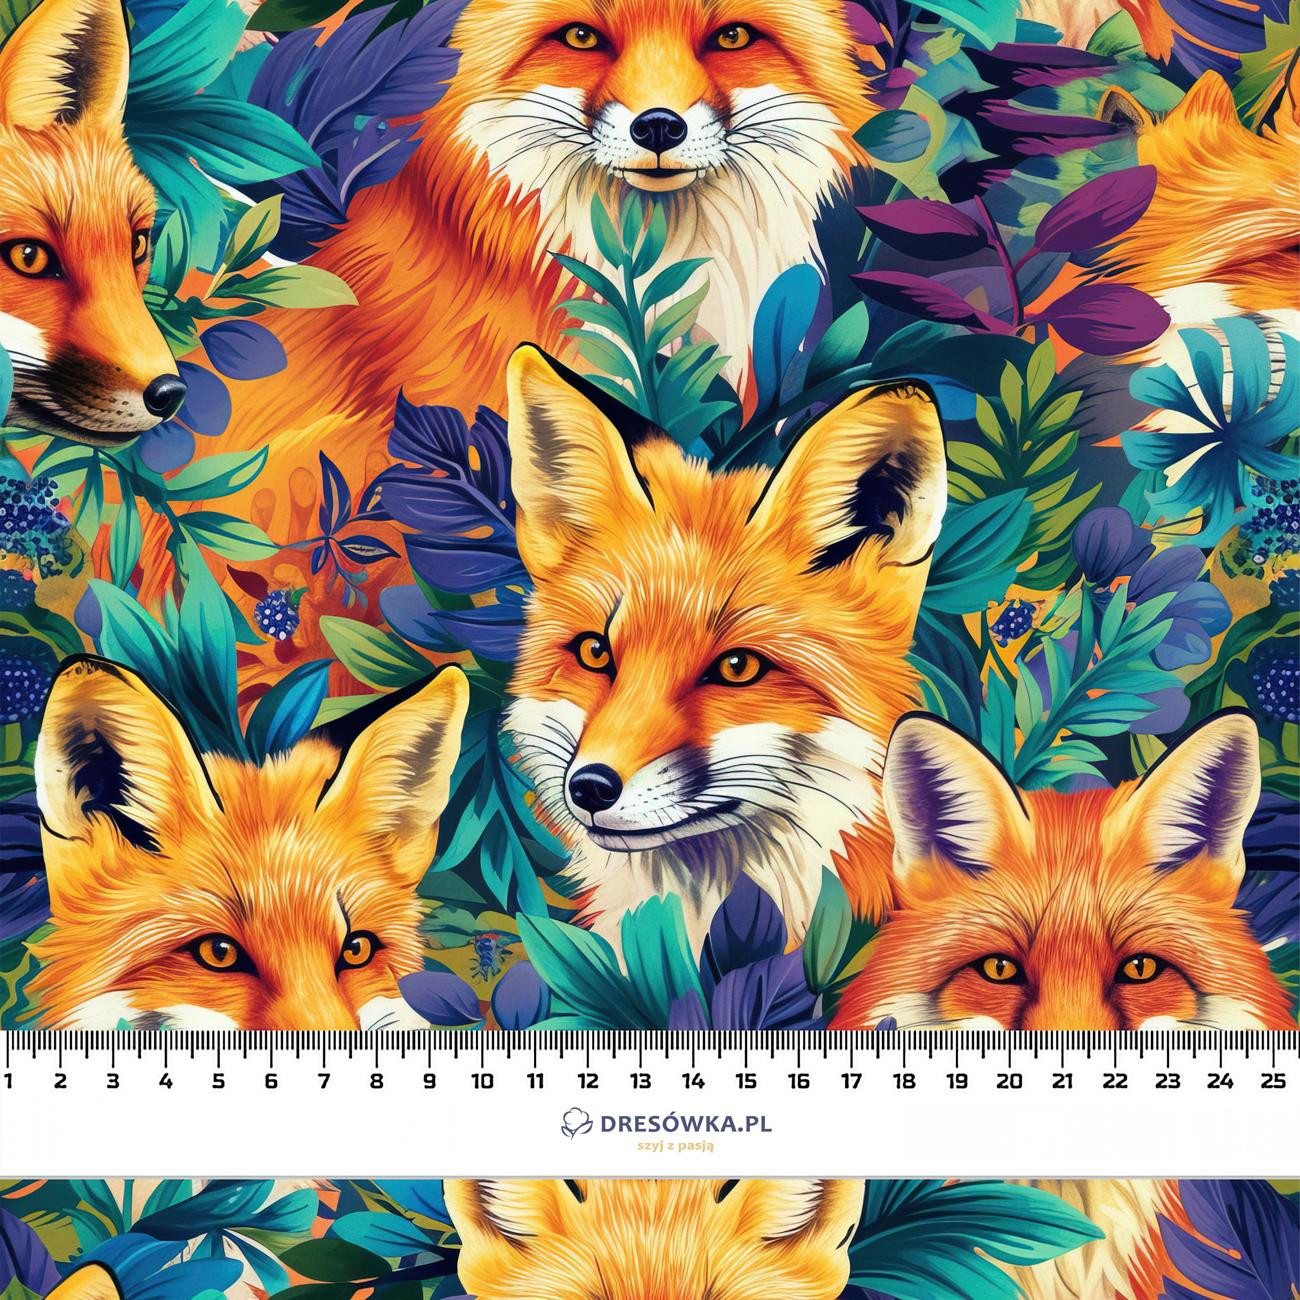 FOXES - quick-drying woven fabric